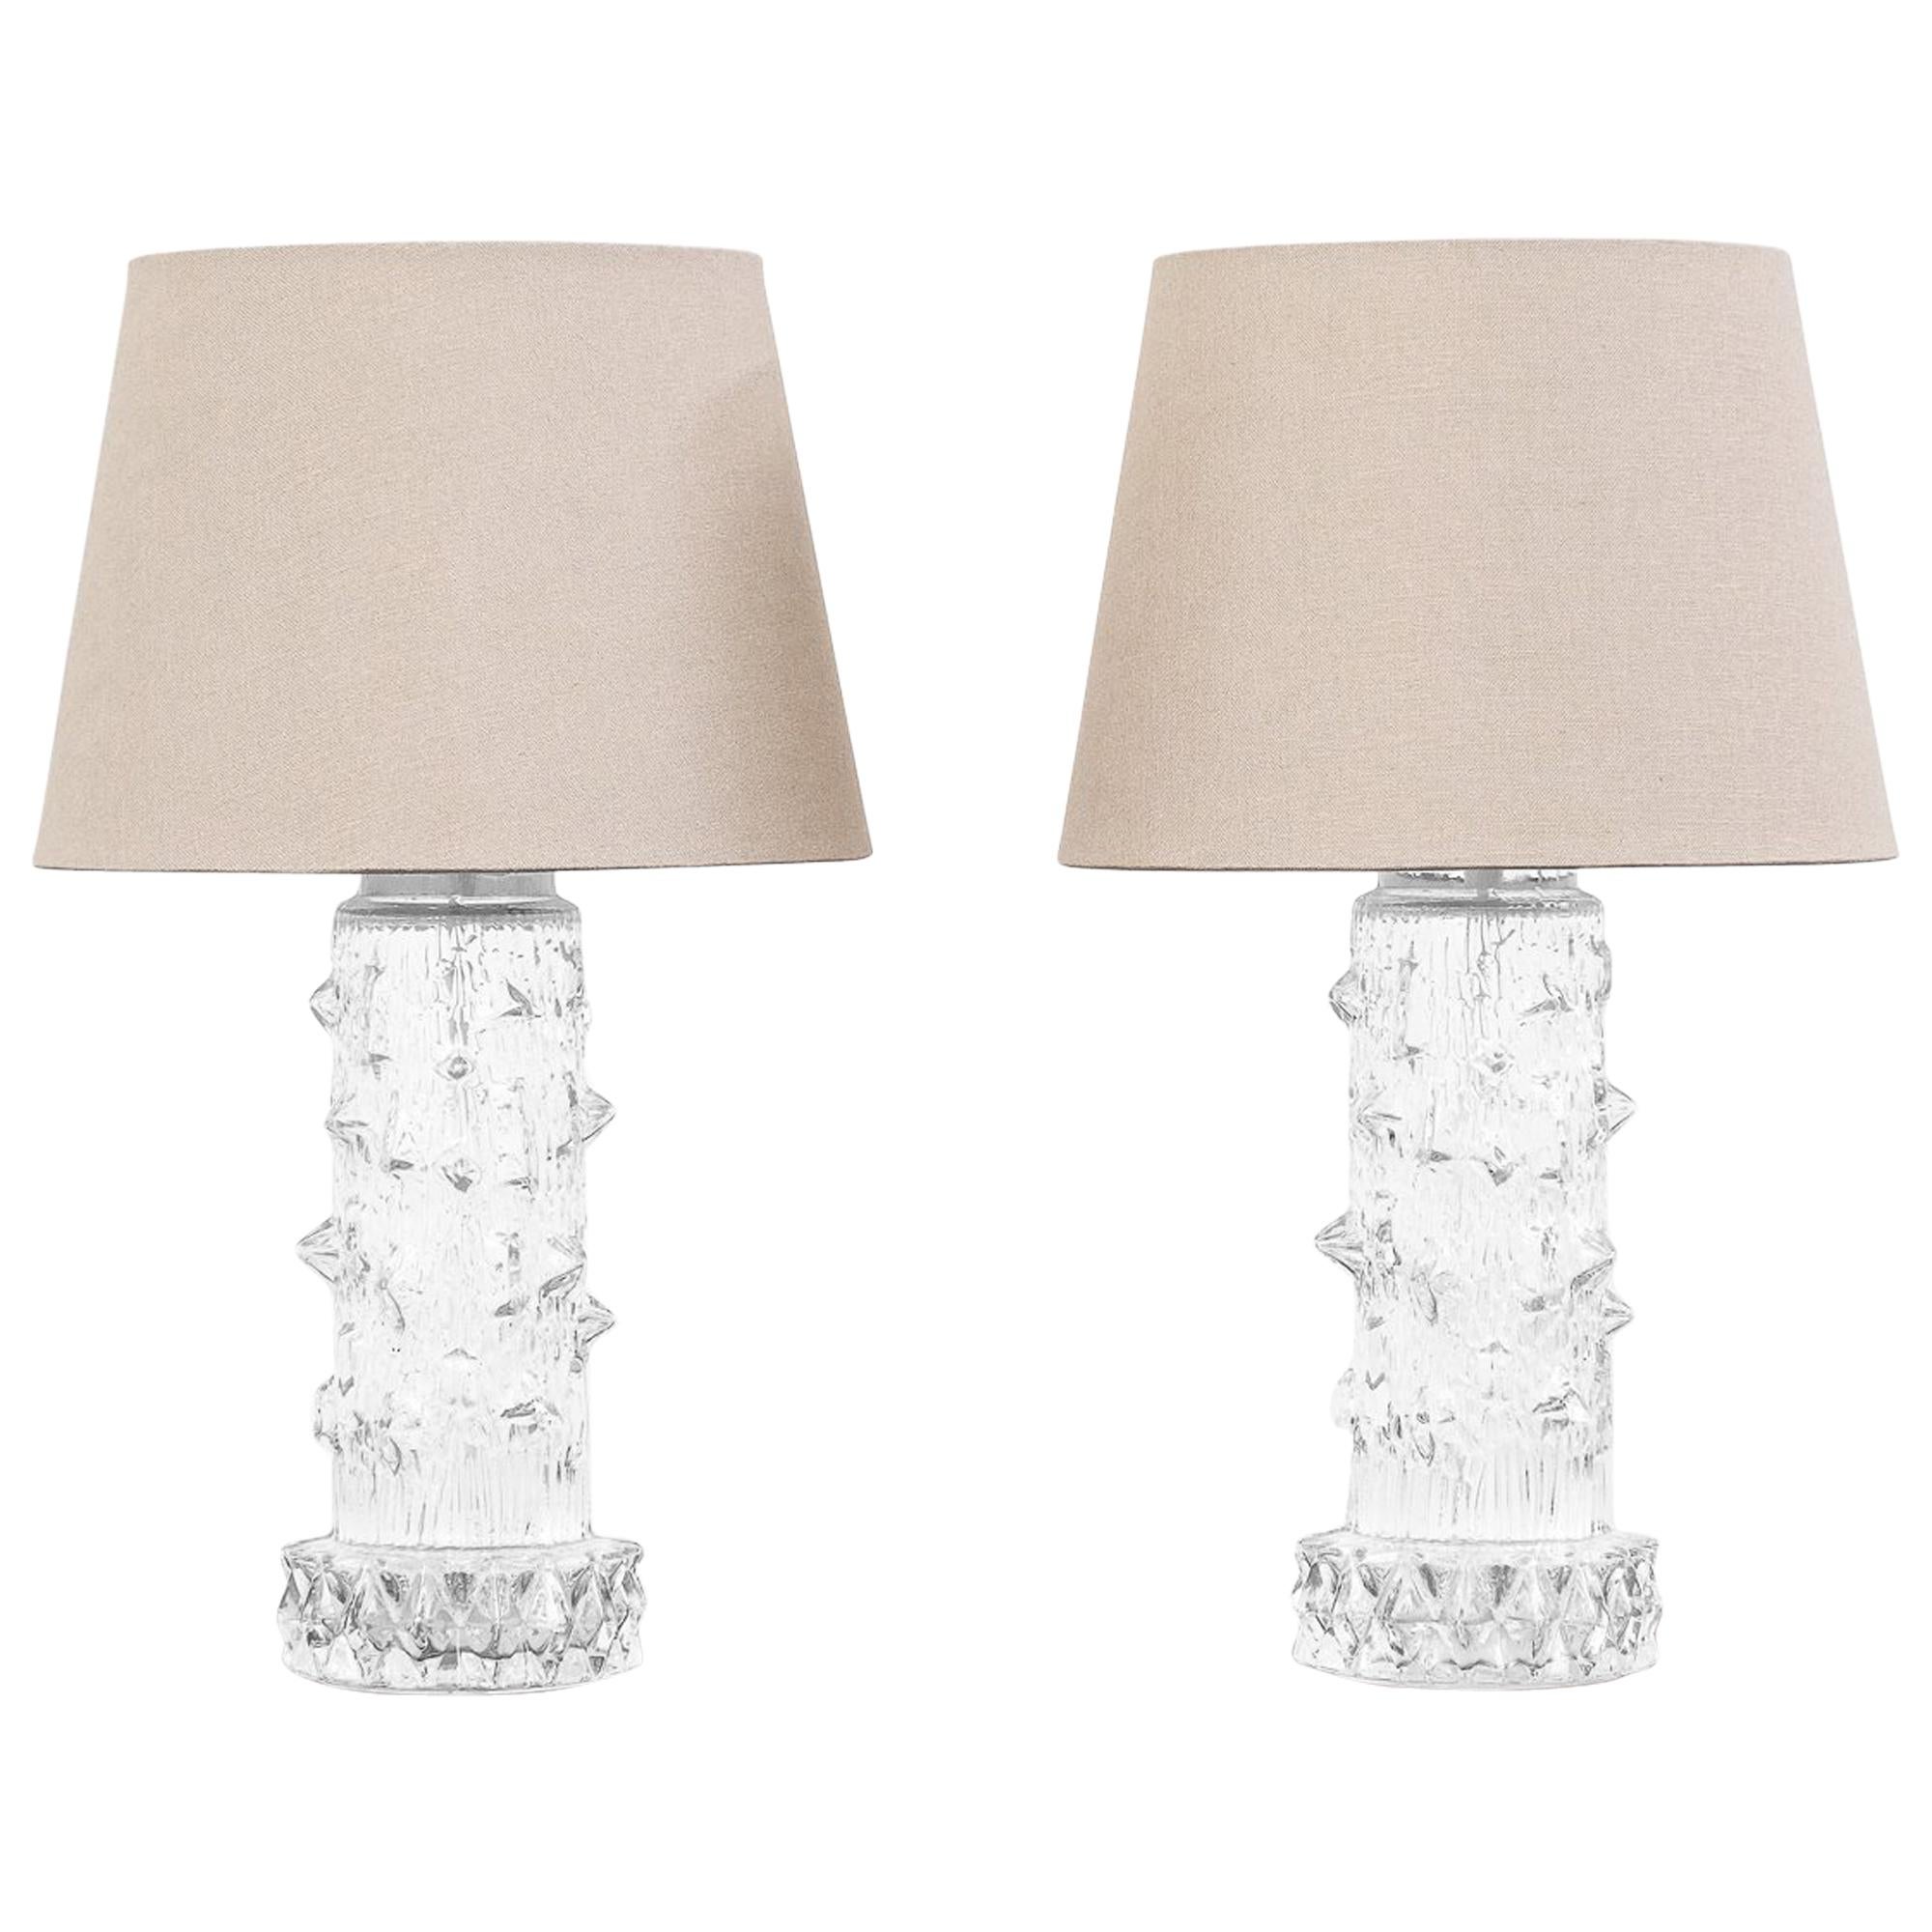 Pair of Midcentury Scandinavian Clear Glass Table Lamps